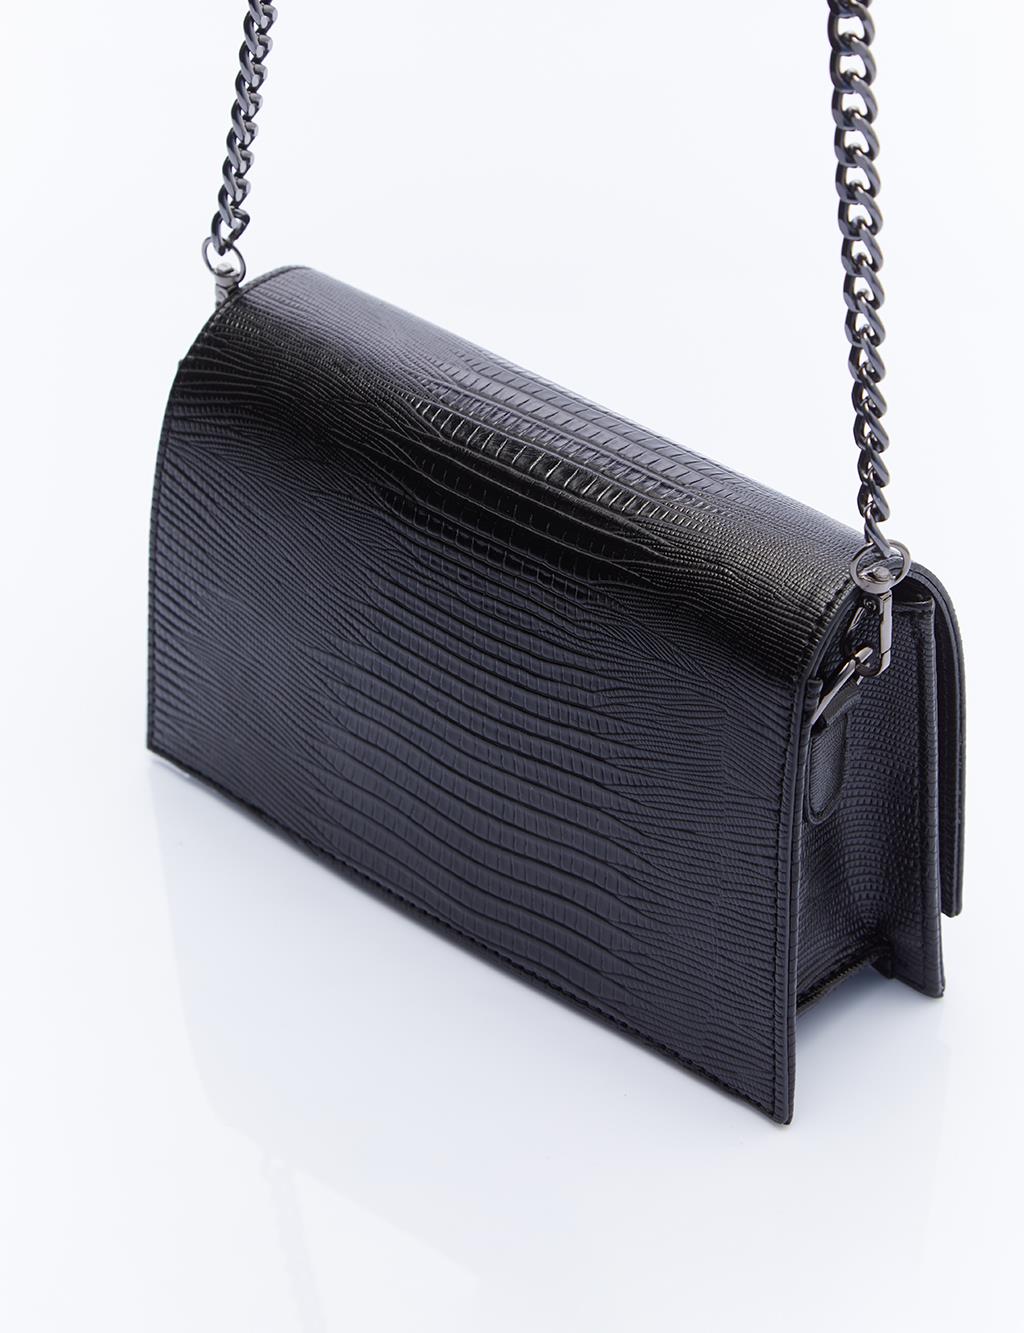  Chain Strap Cover Patterned Black Bag 